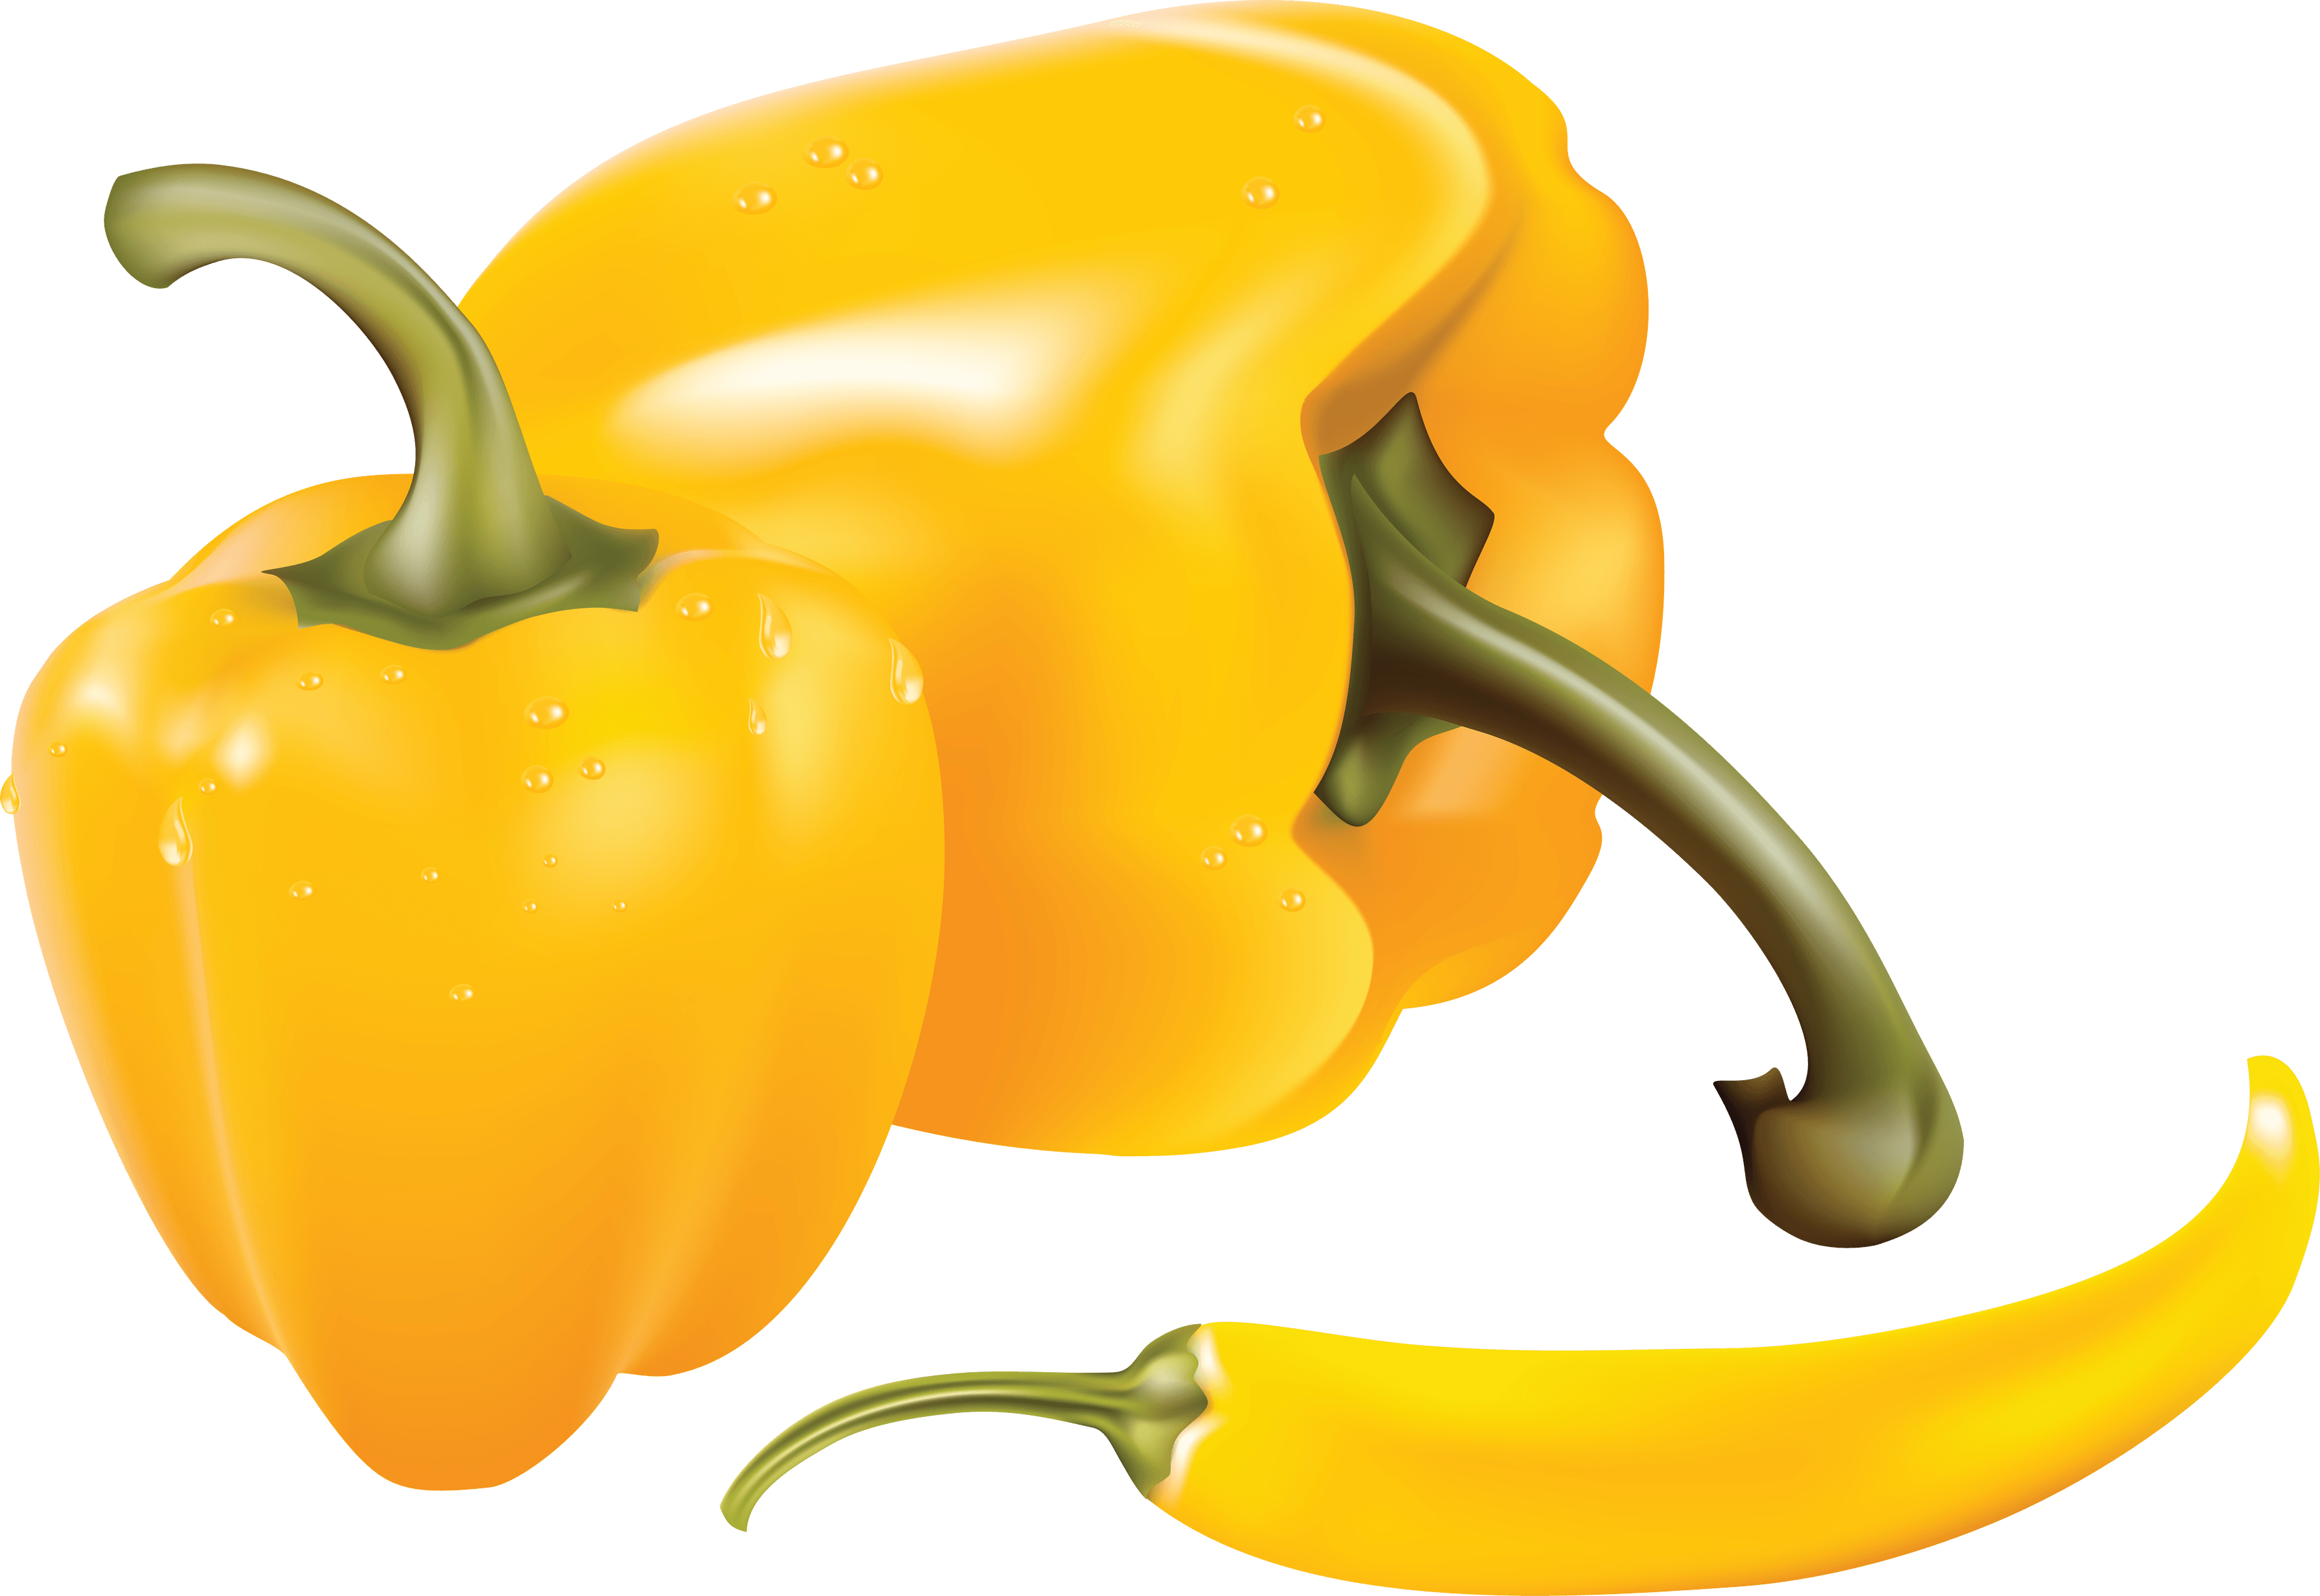 Download Yellow Pepper Png Image HQ PNG Image in different resolution